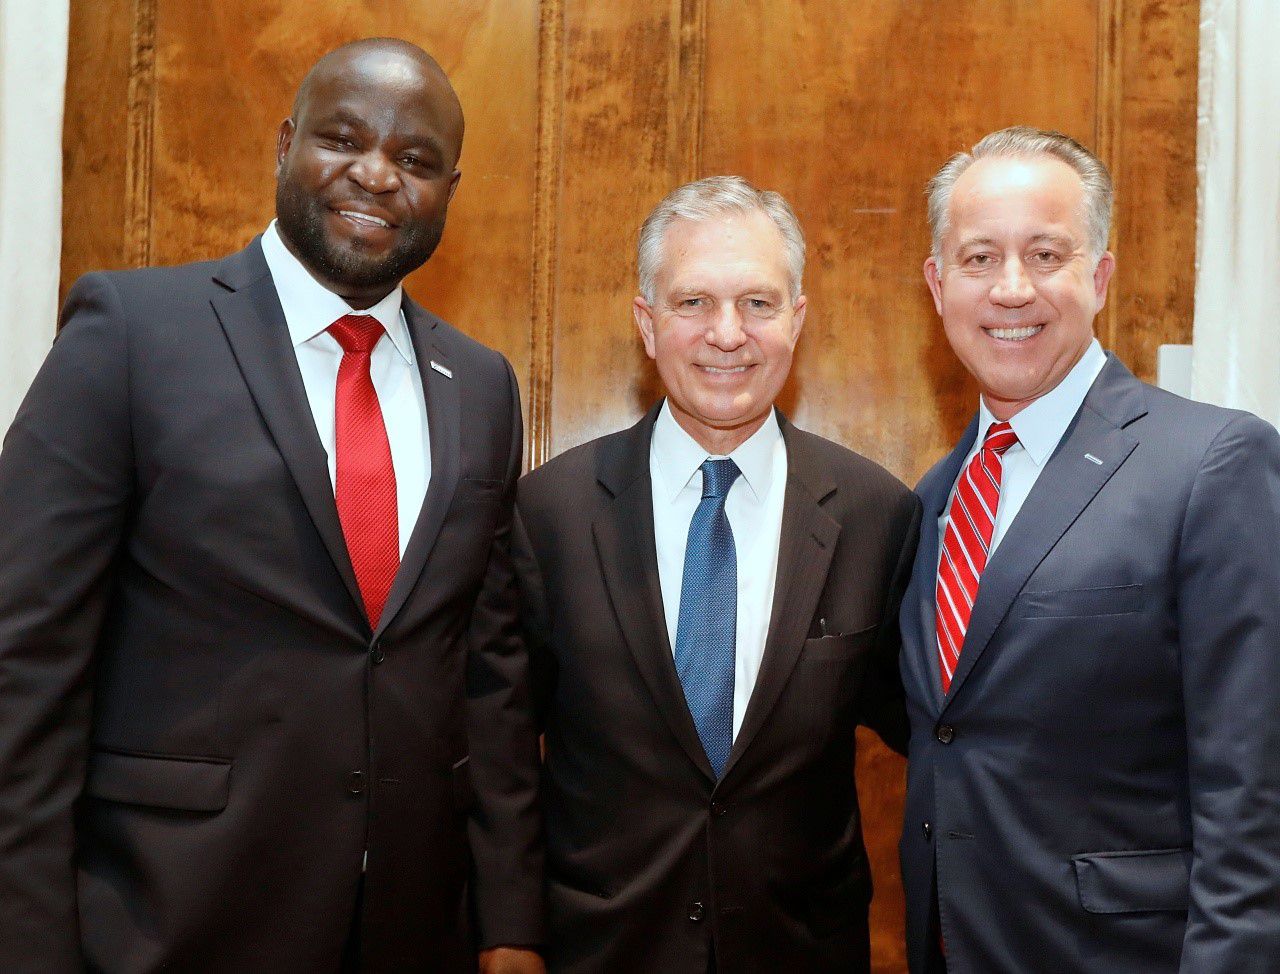 From left: John Olajide, 2020 chairman of the Dallas Regional Chamber, Dale Petroskey, chamber CEO, and Toyota executive Chris Nielsen, immediate past chamber chair, at the organization's annual meeting in January.